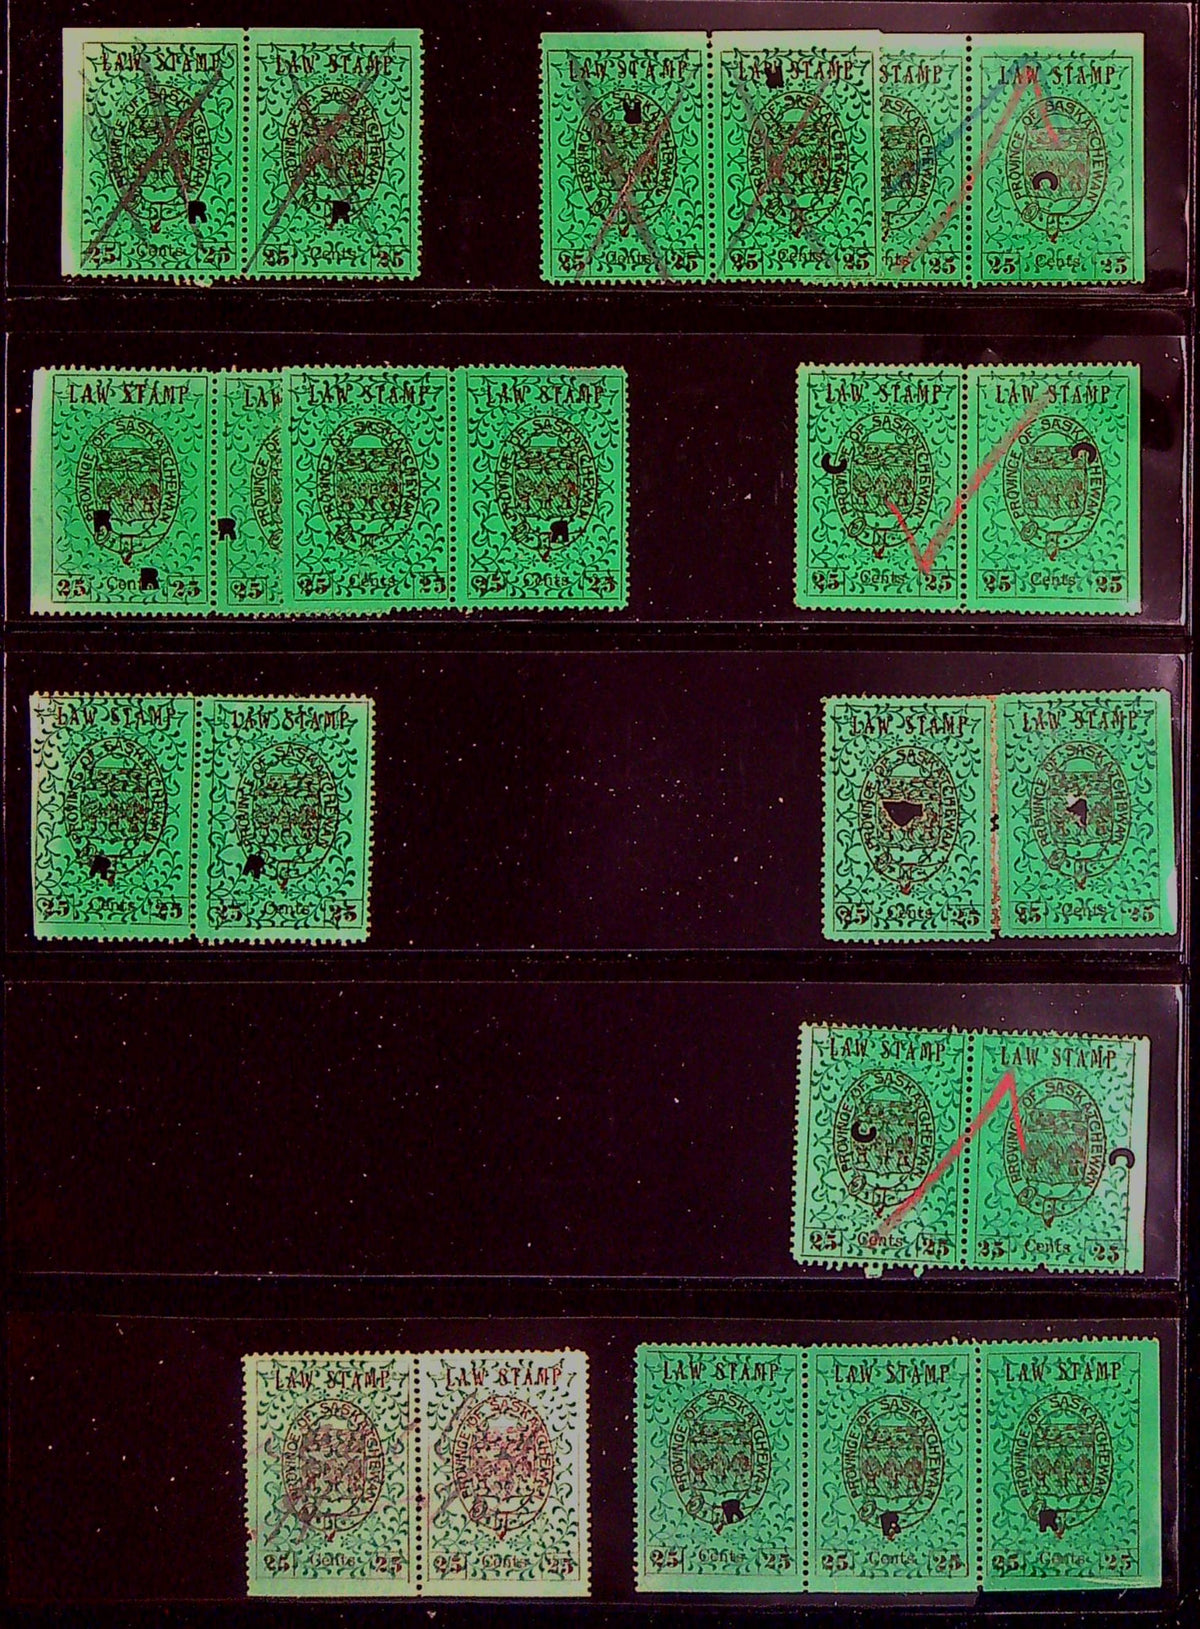 0004SL2108 - SL4 - Used, Reconstructed Sheet